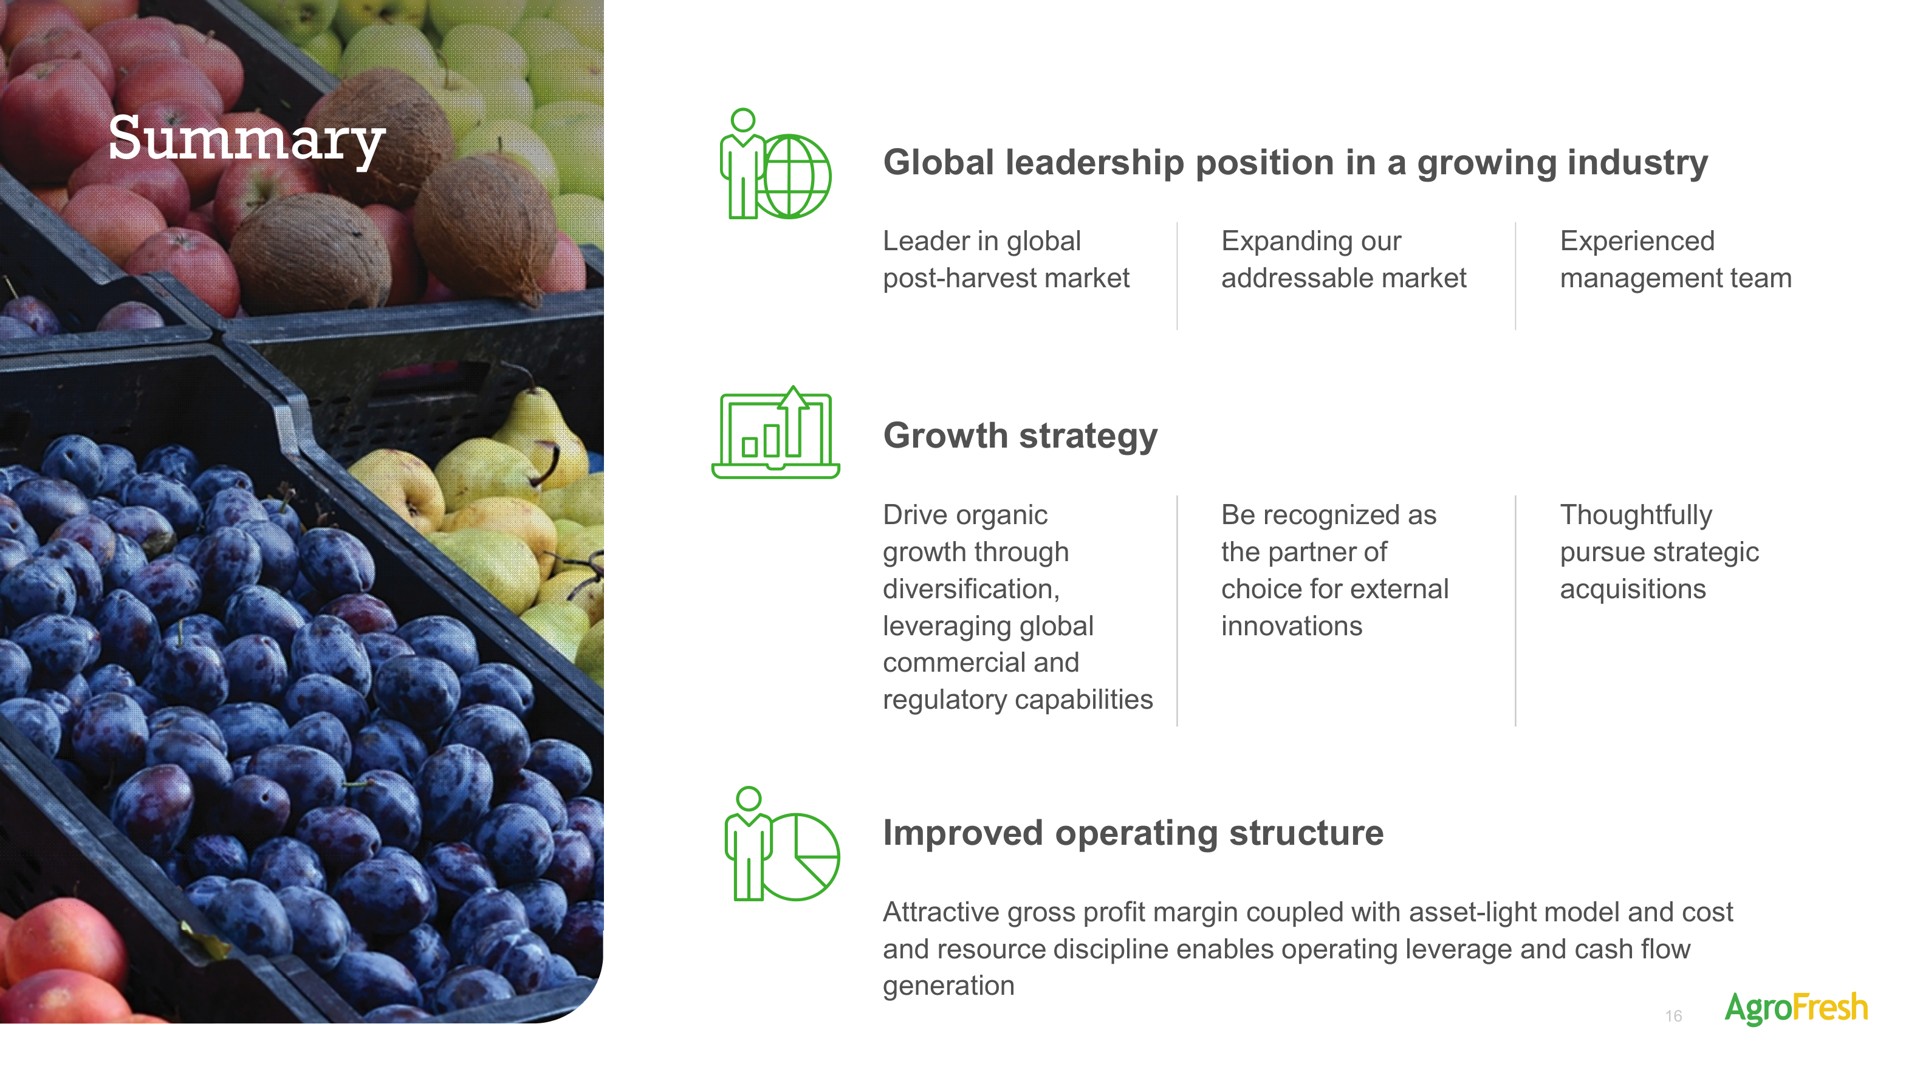 summary global leadership position in a growing industry growth strategy improved operating structure | AgroFresh